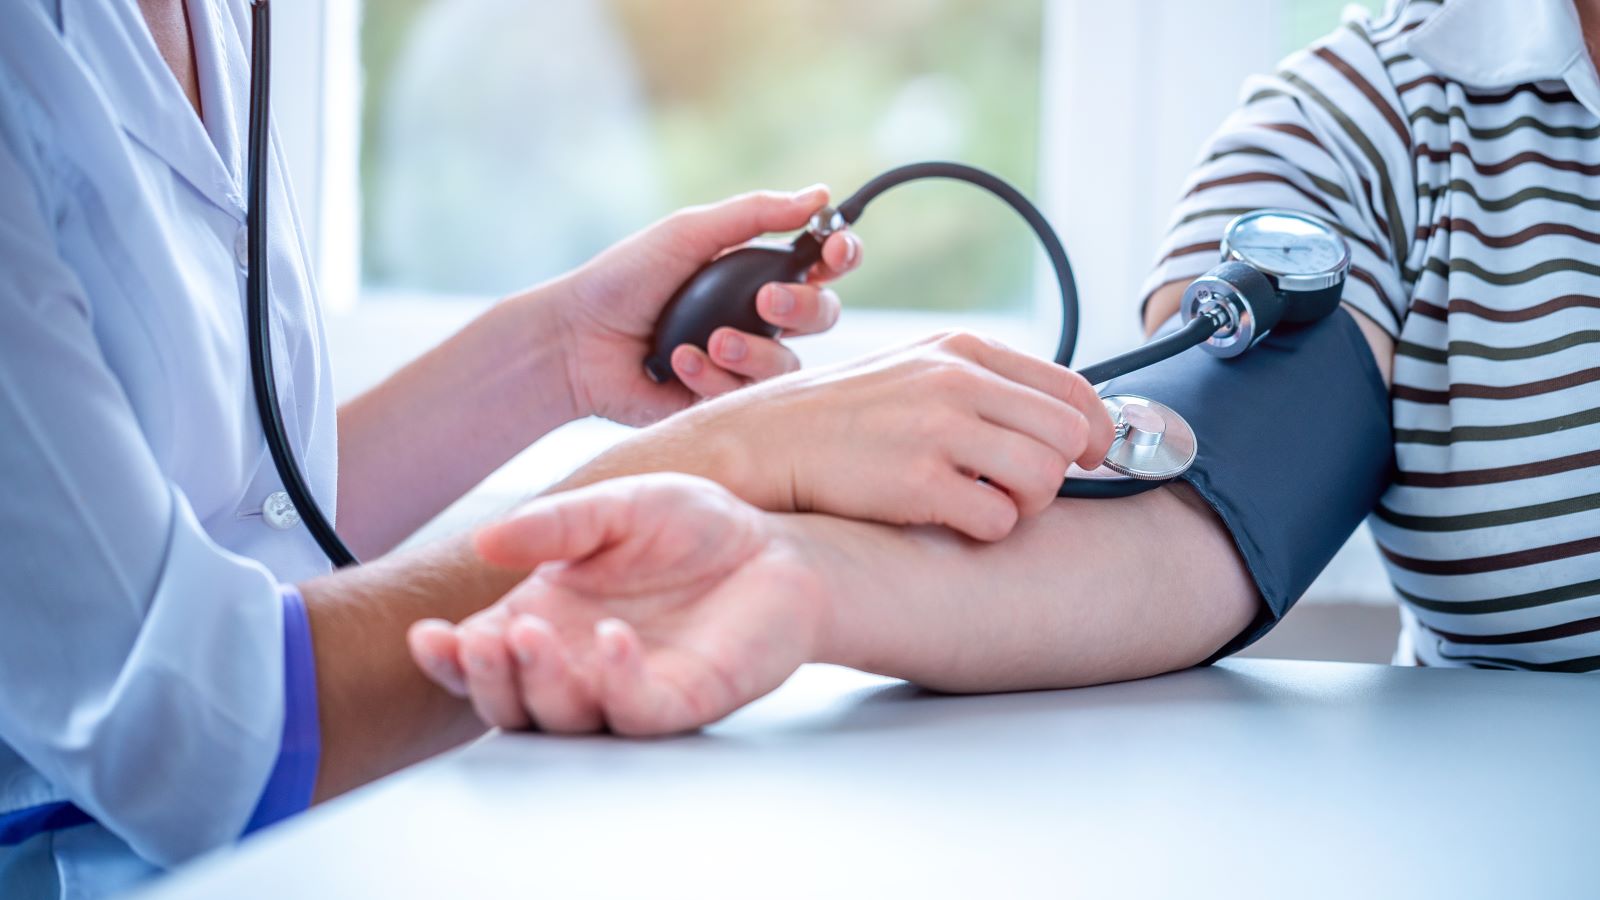 Blood pressure is vital, but it changes over time. But does that mean it's "normal" to have high blood pressure when we're older?